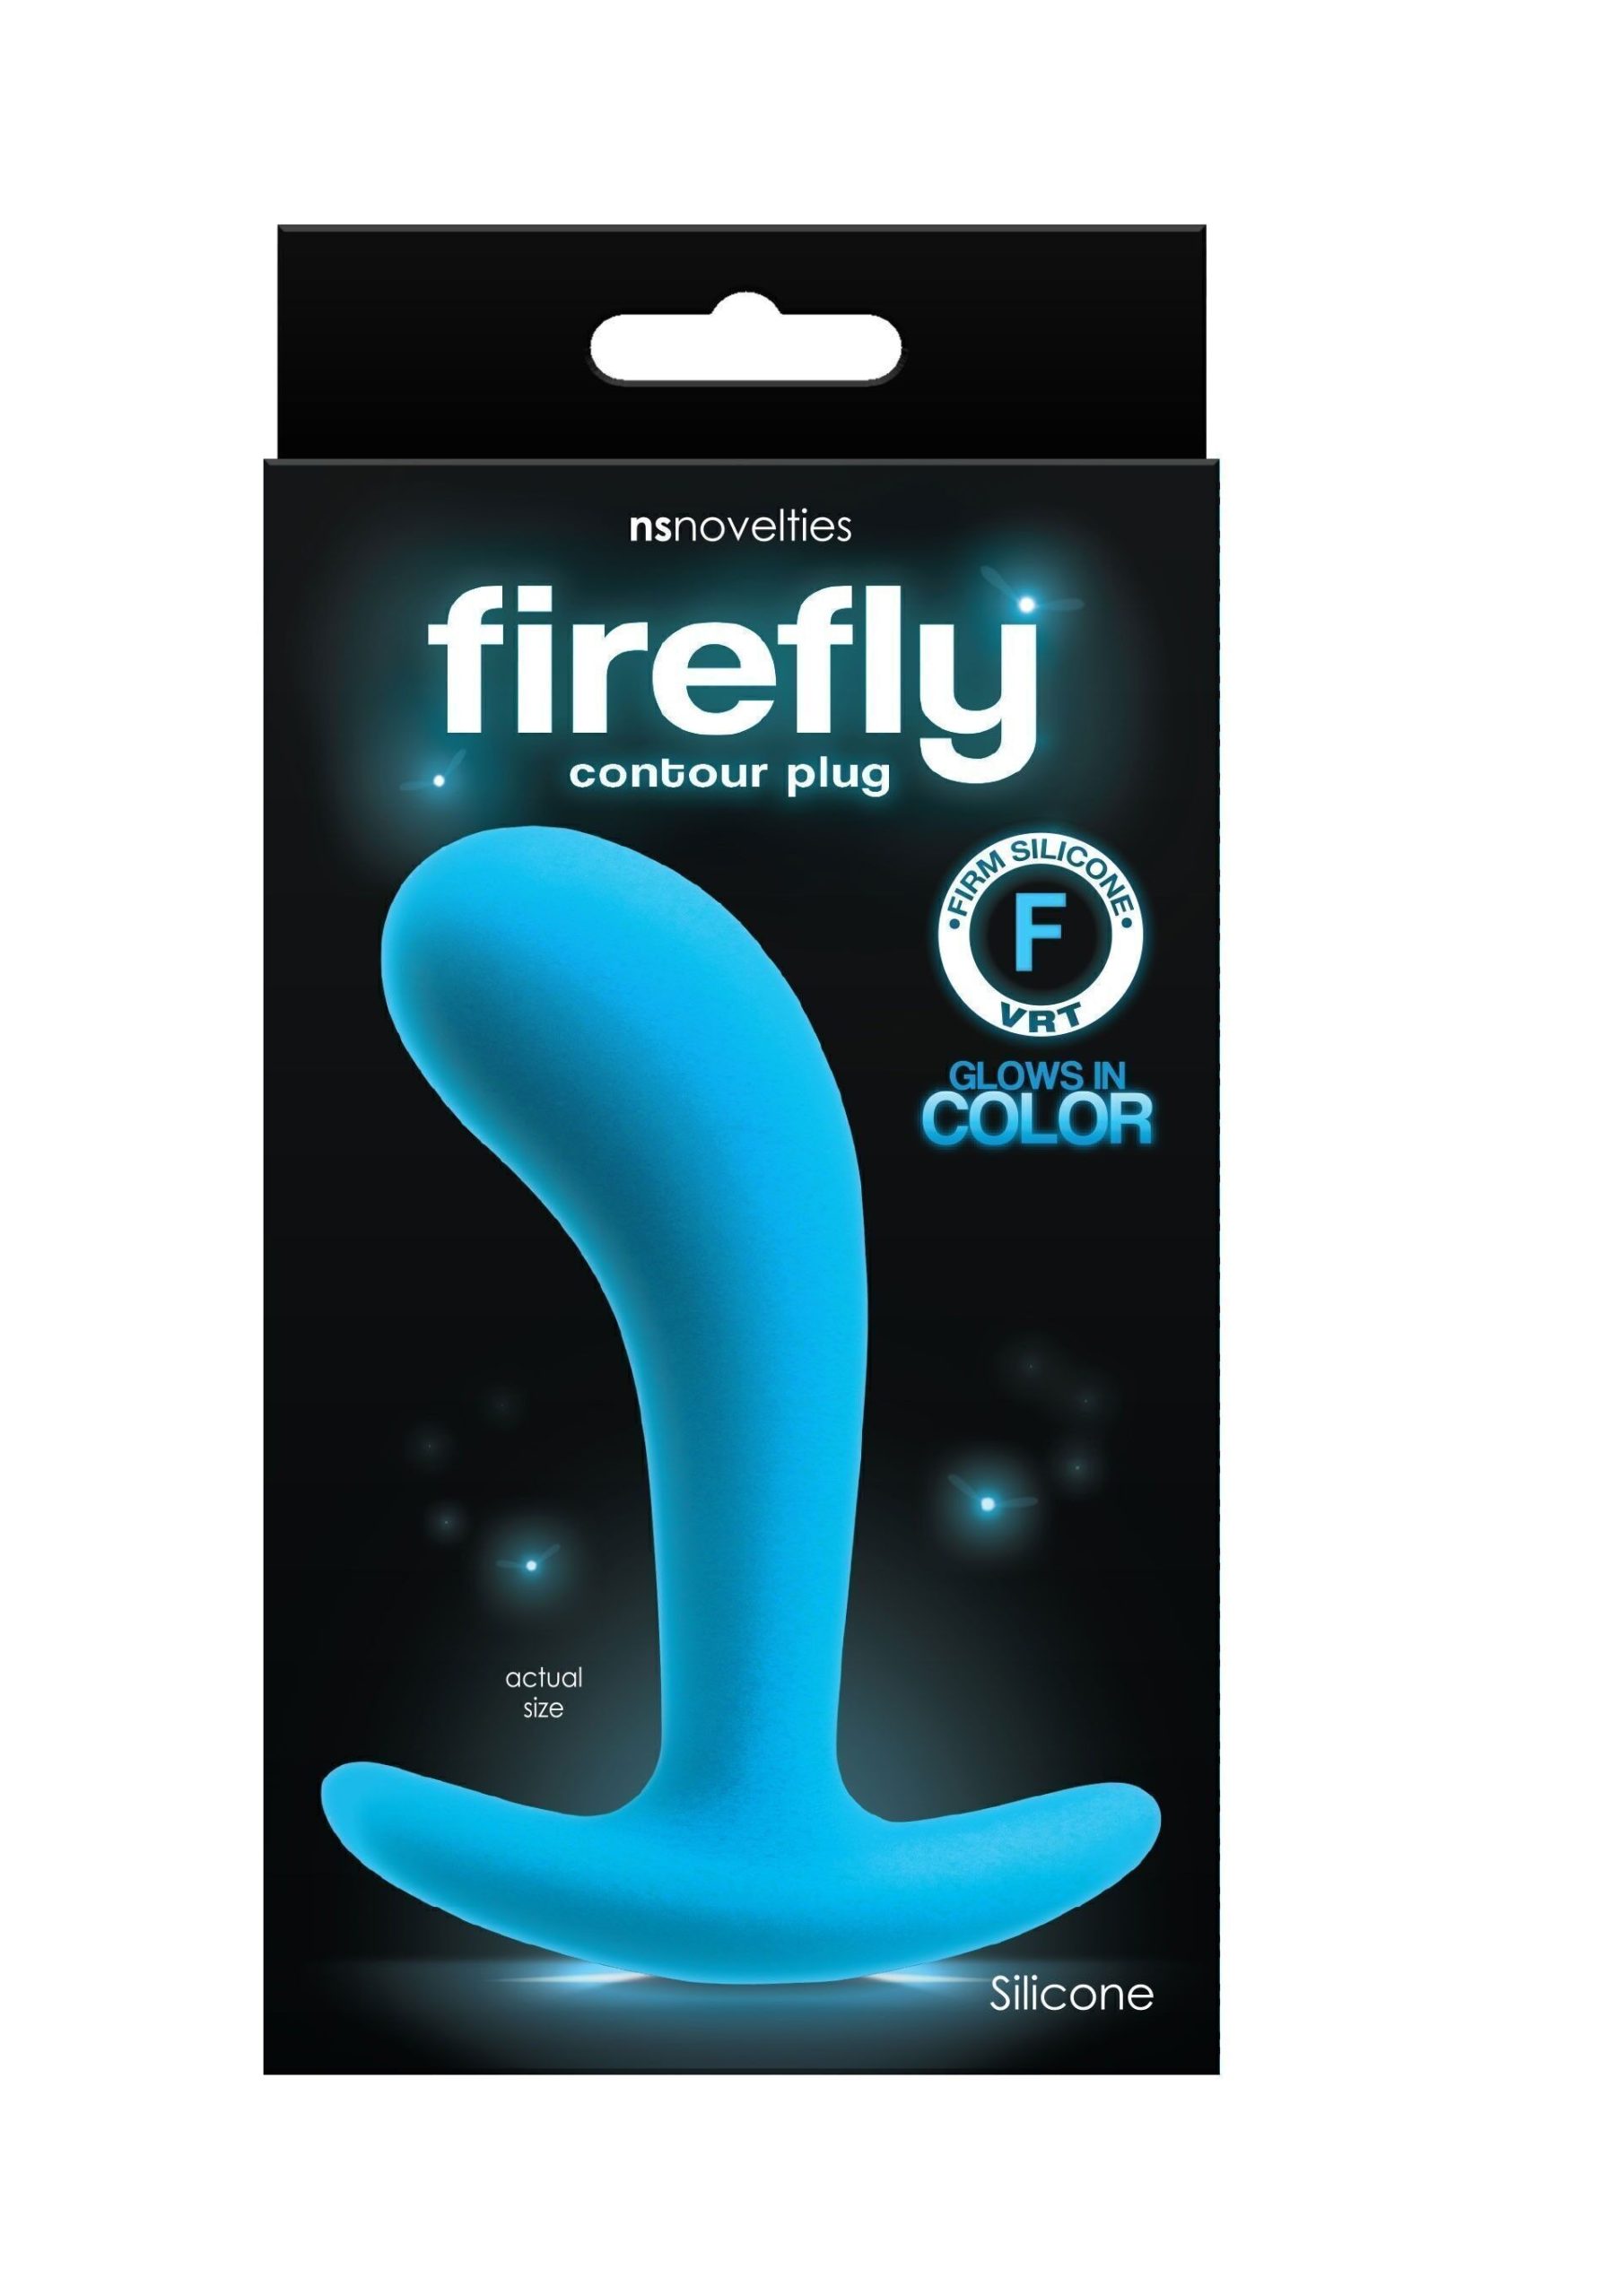 Plug Anale Contour Firefly Large